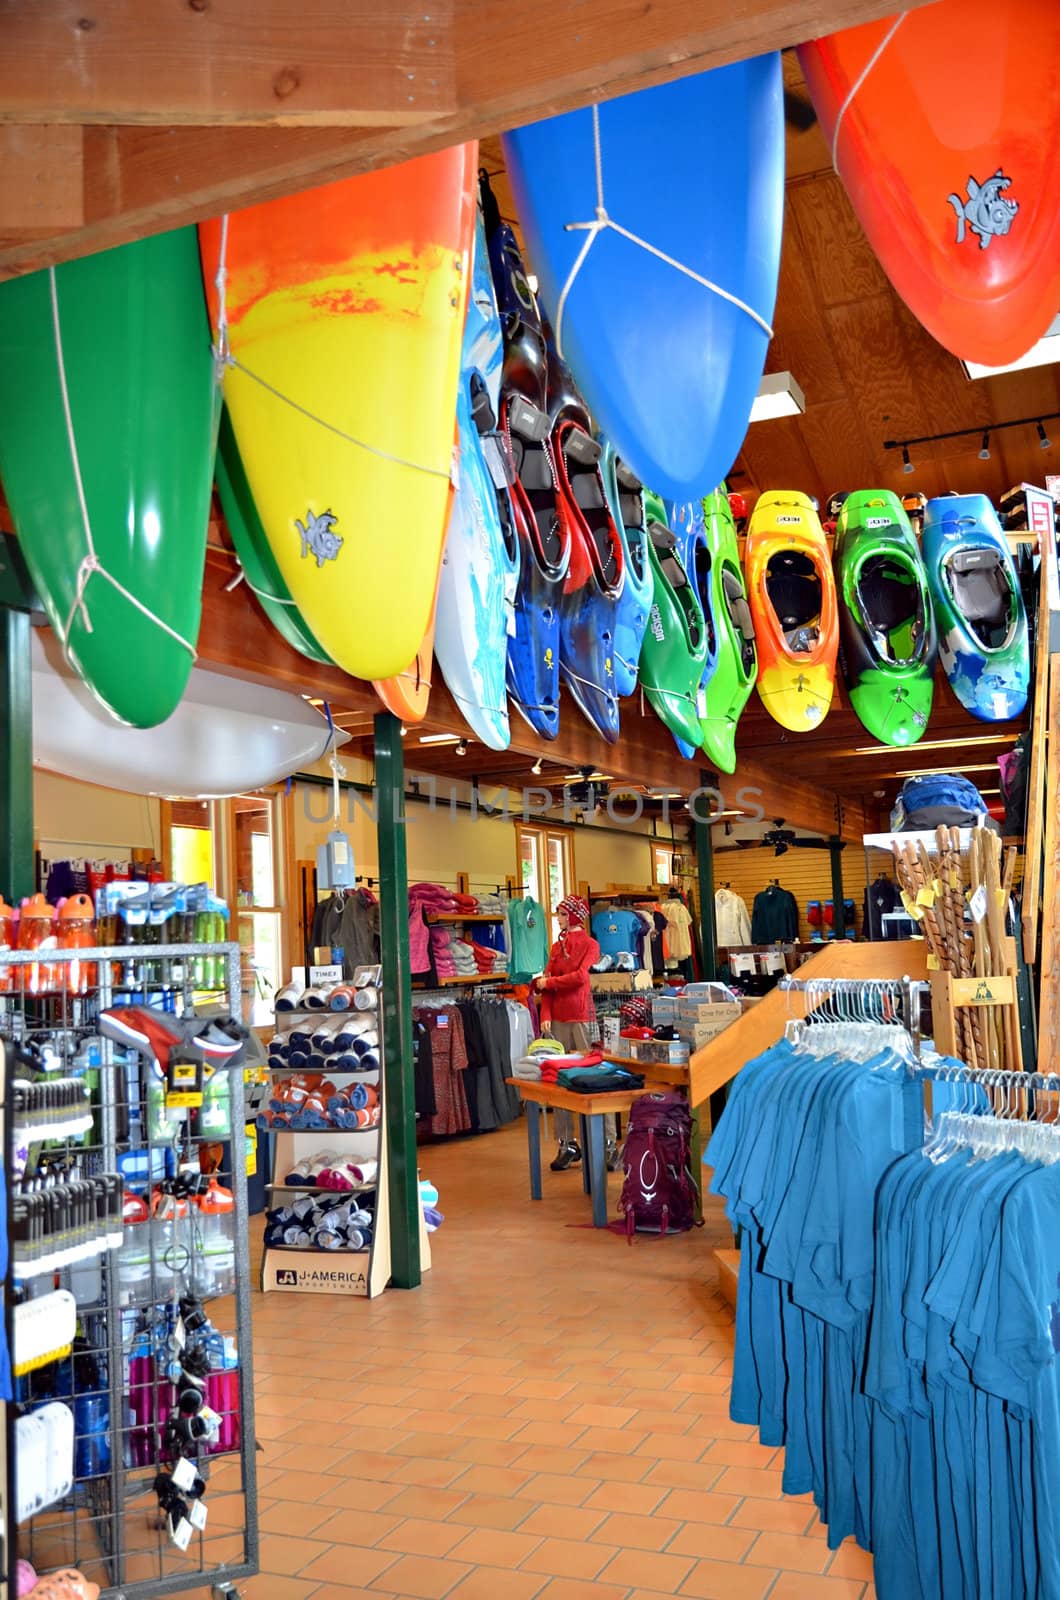 BRYSON CITY, NC, USA - SEPT 9: Nantahala Outdoor Center, Sept, 9, 2012, on the Nantahala River, largest commercial outdoor guide service and retail store in the area, offering clothing and equipment for activities.